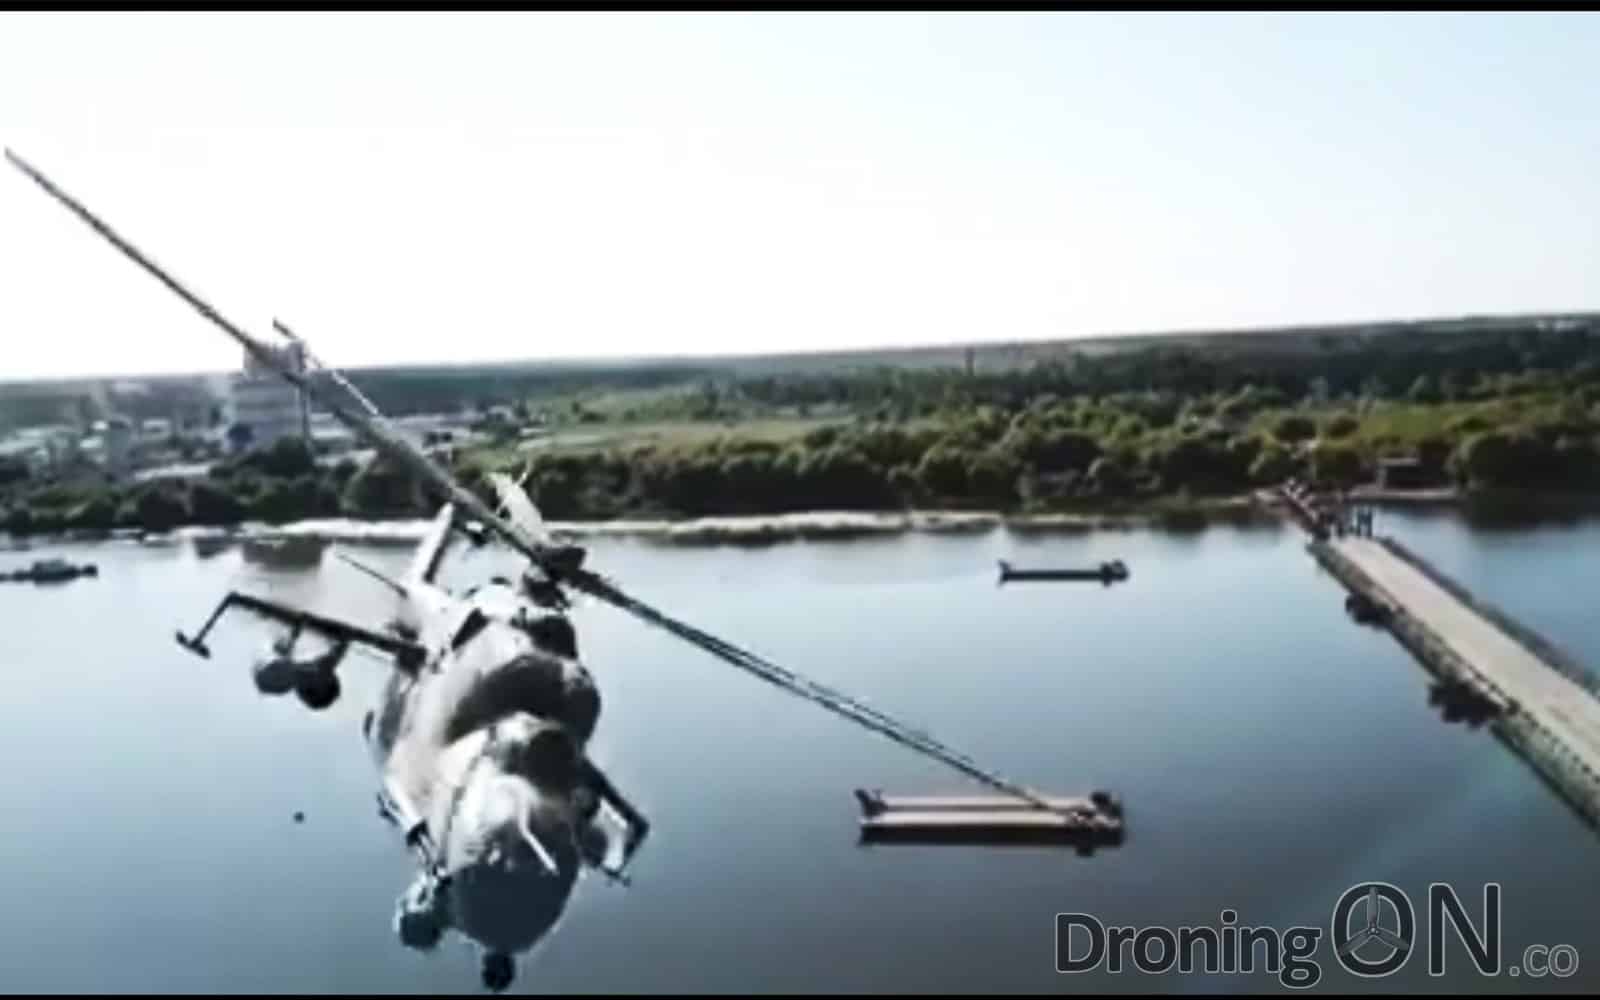 Drone vs Russian MI-24 Helicopter Near-Miss - REAL or FAKE?